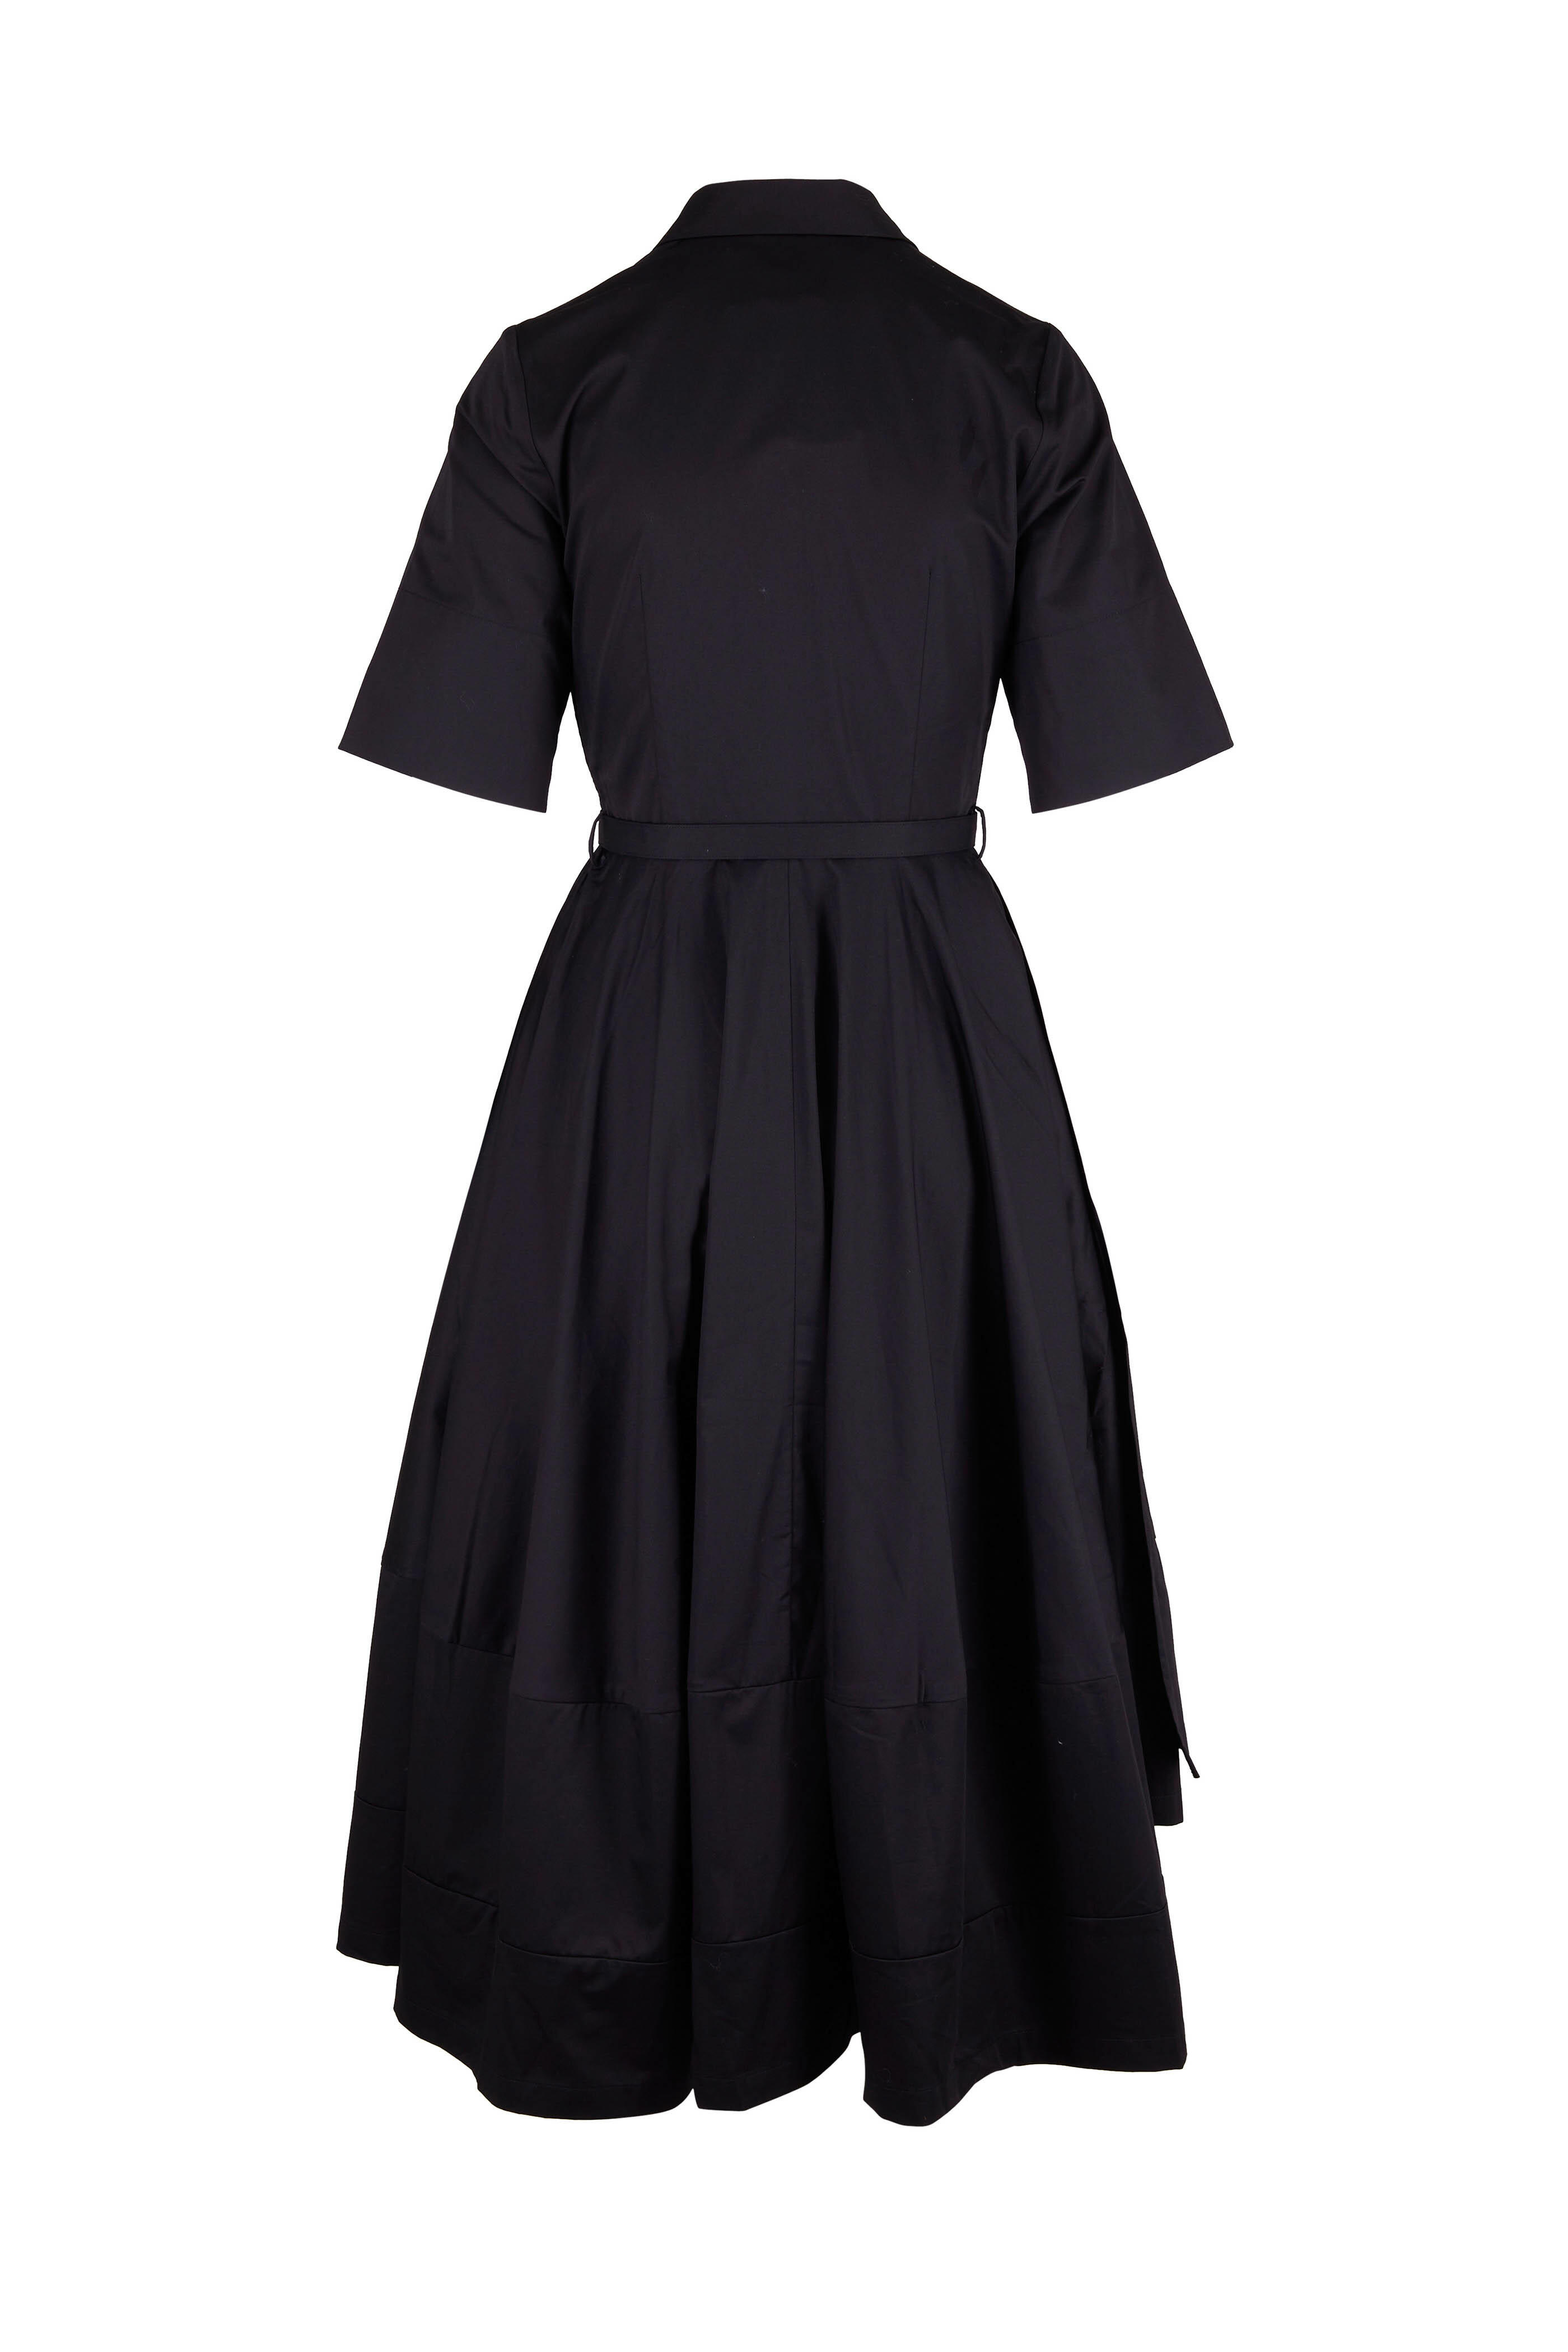 CO Collection - Essentials Black Short Sleeve Flared Dress